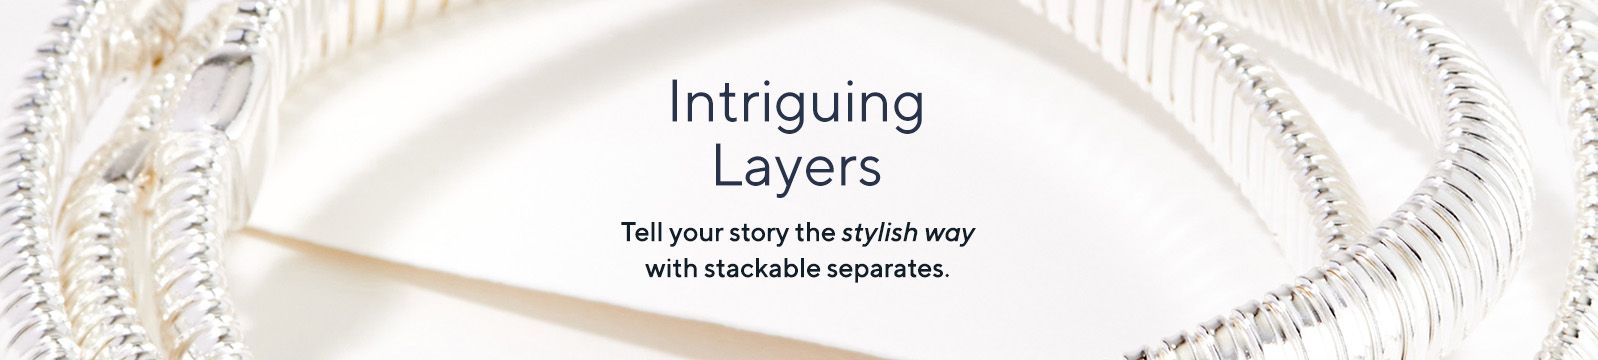 Intriguing Layers Tell your story the stylish way with stackable separates.